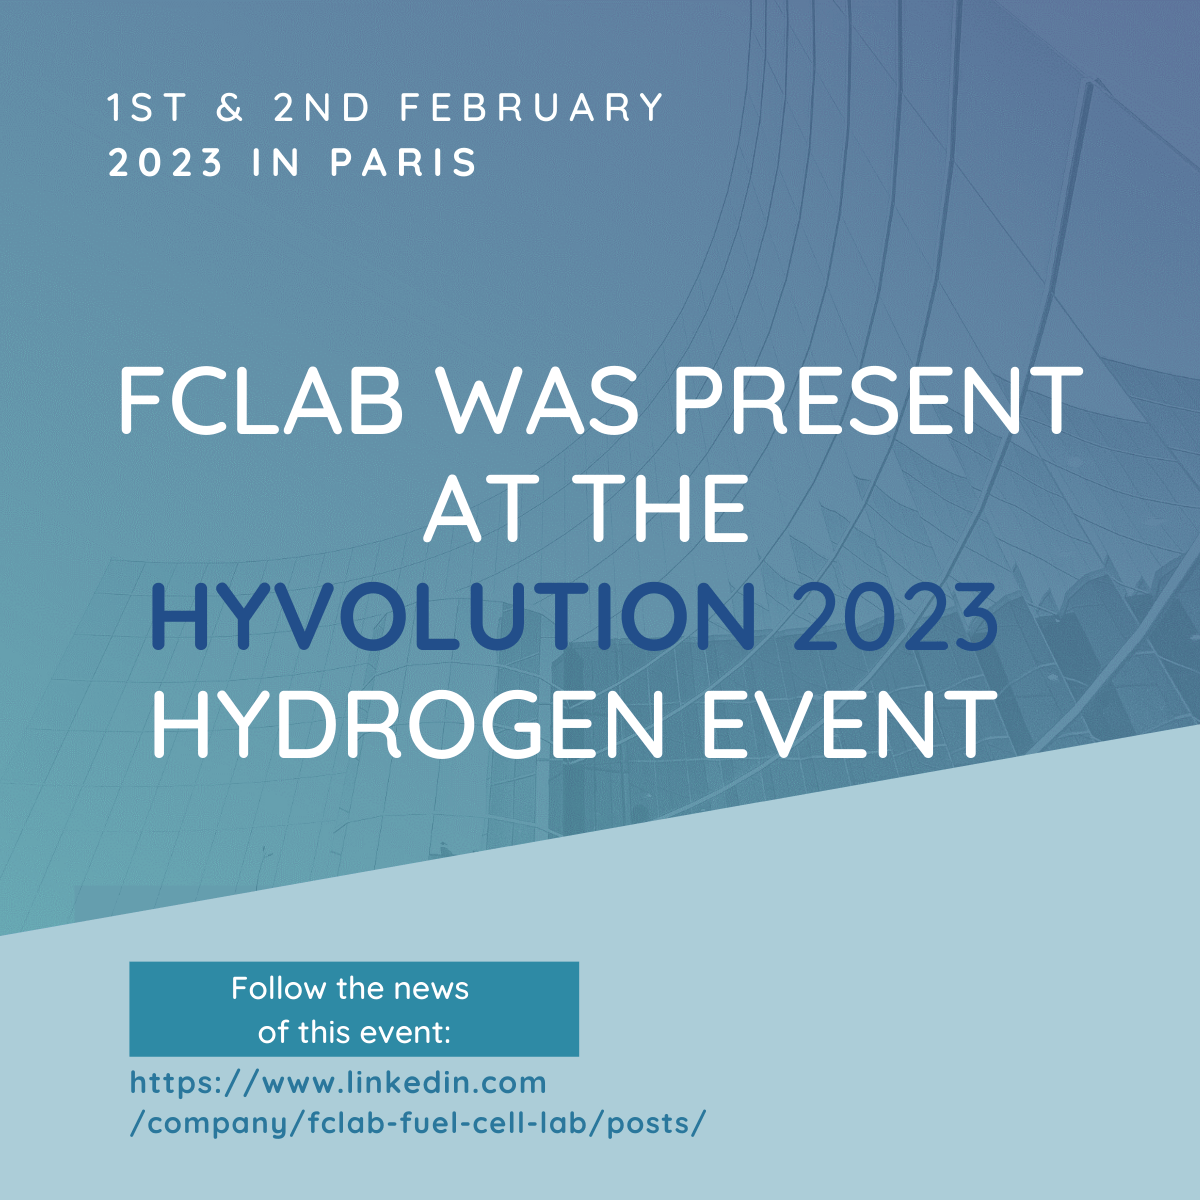 FCLAB was present at the Hyvolution event – 1st & 2nd February 2023 in Paris